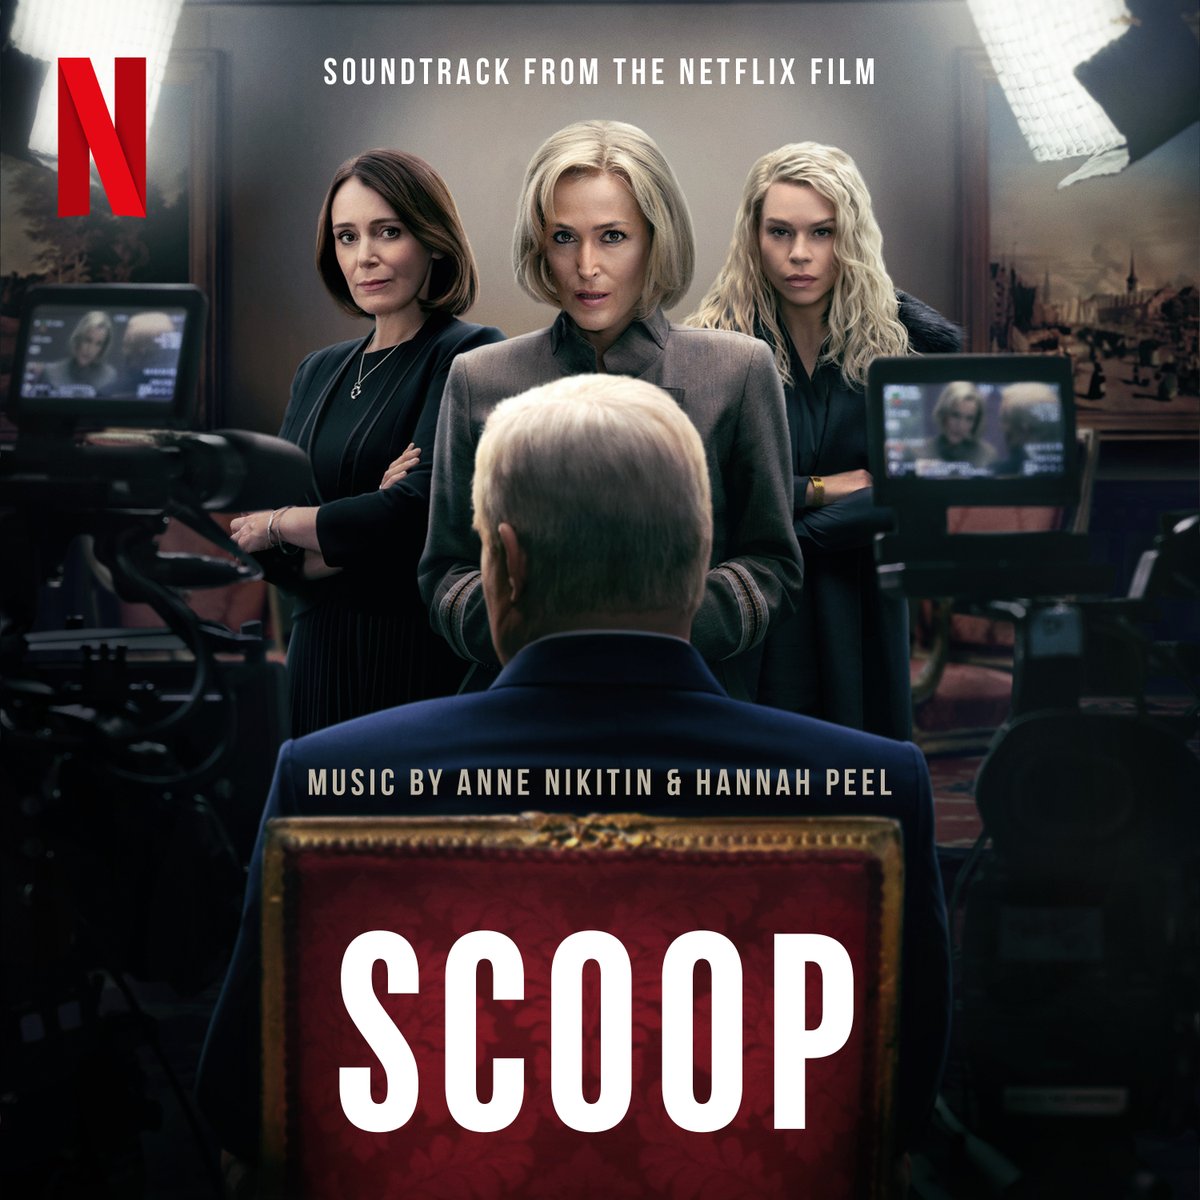 The soundtrack album to @netflix's Prince Andrew feature #Scoop is out TODAY 👉 netflixmusic.ffm.to/scoopfilm Scored by FAM's @Hanpeel and @annenikitin, directed by Philip Martin and starring Gillian Anderson, Billie Piper, Rufus Sewell & Keeley Hawes.